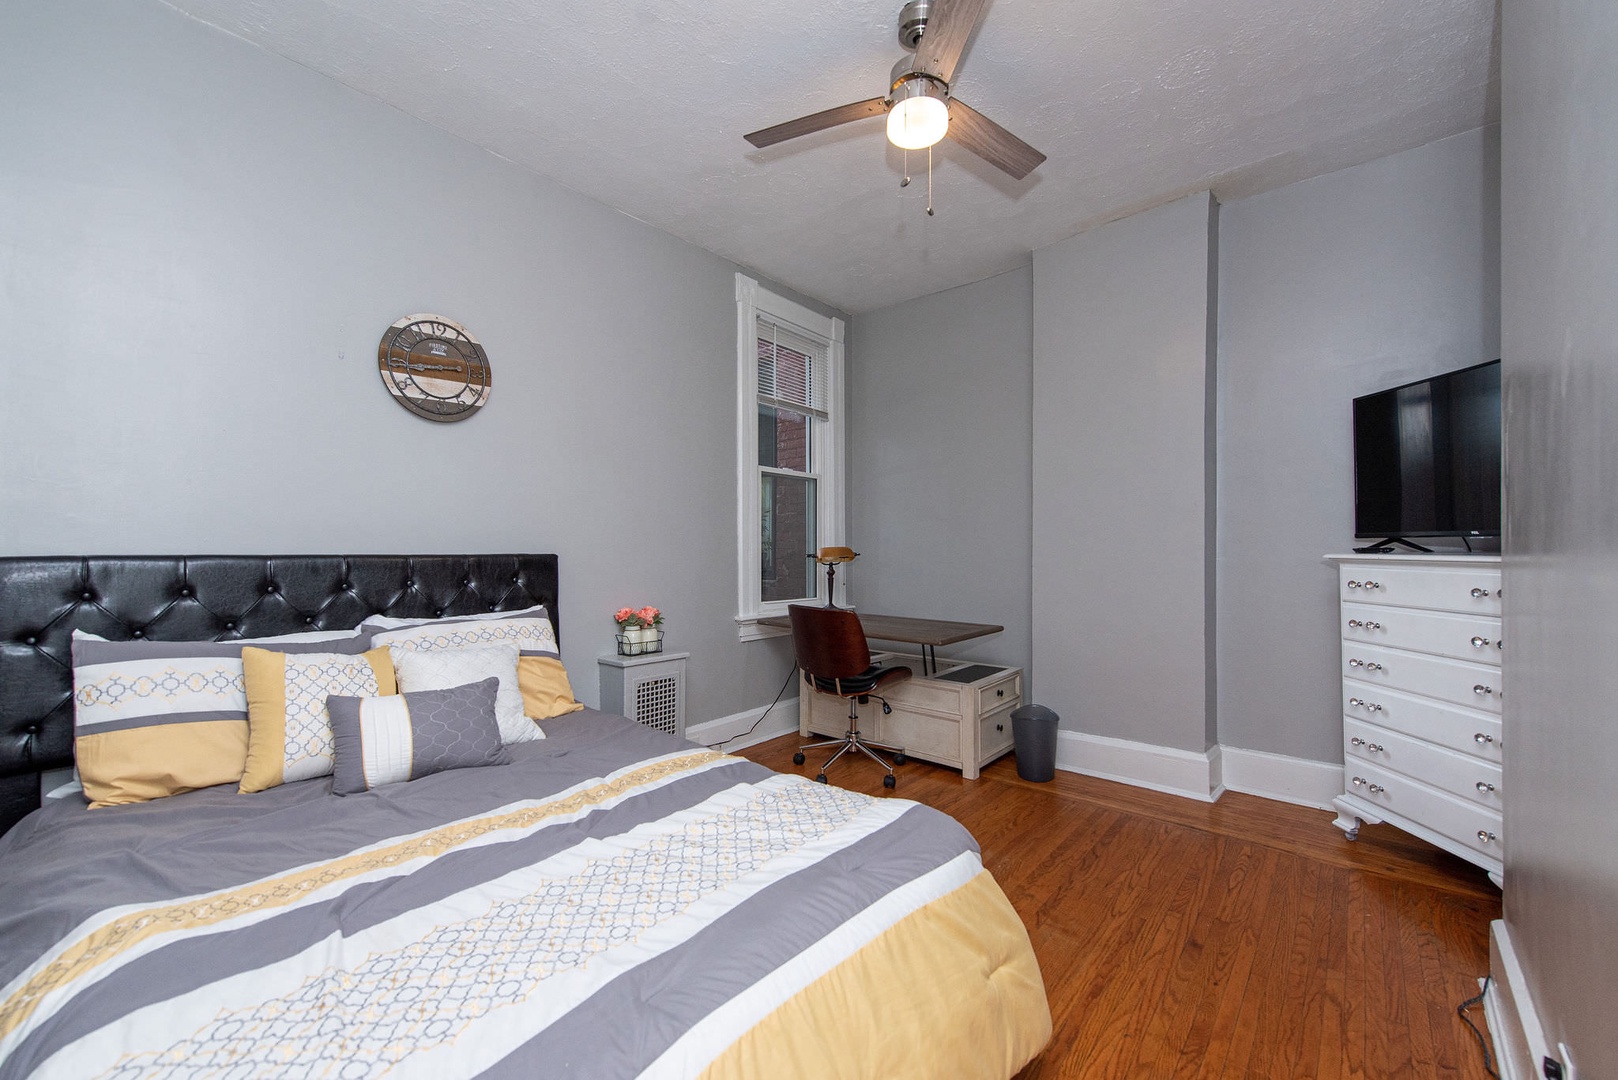 The 2nd of 3 bedrooms offers a full bed, Smart TV, & desk/workspace